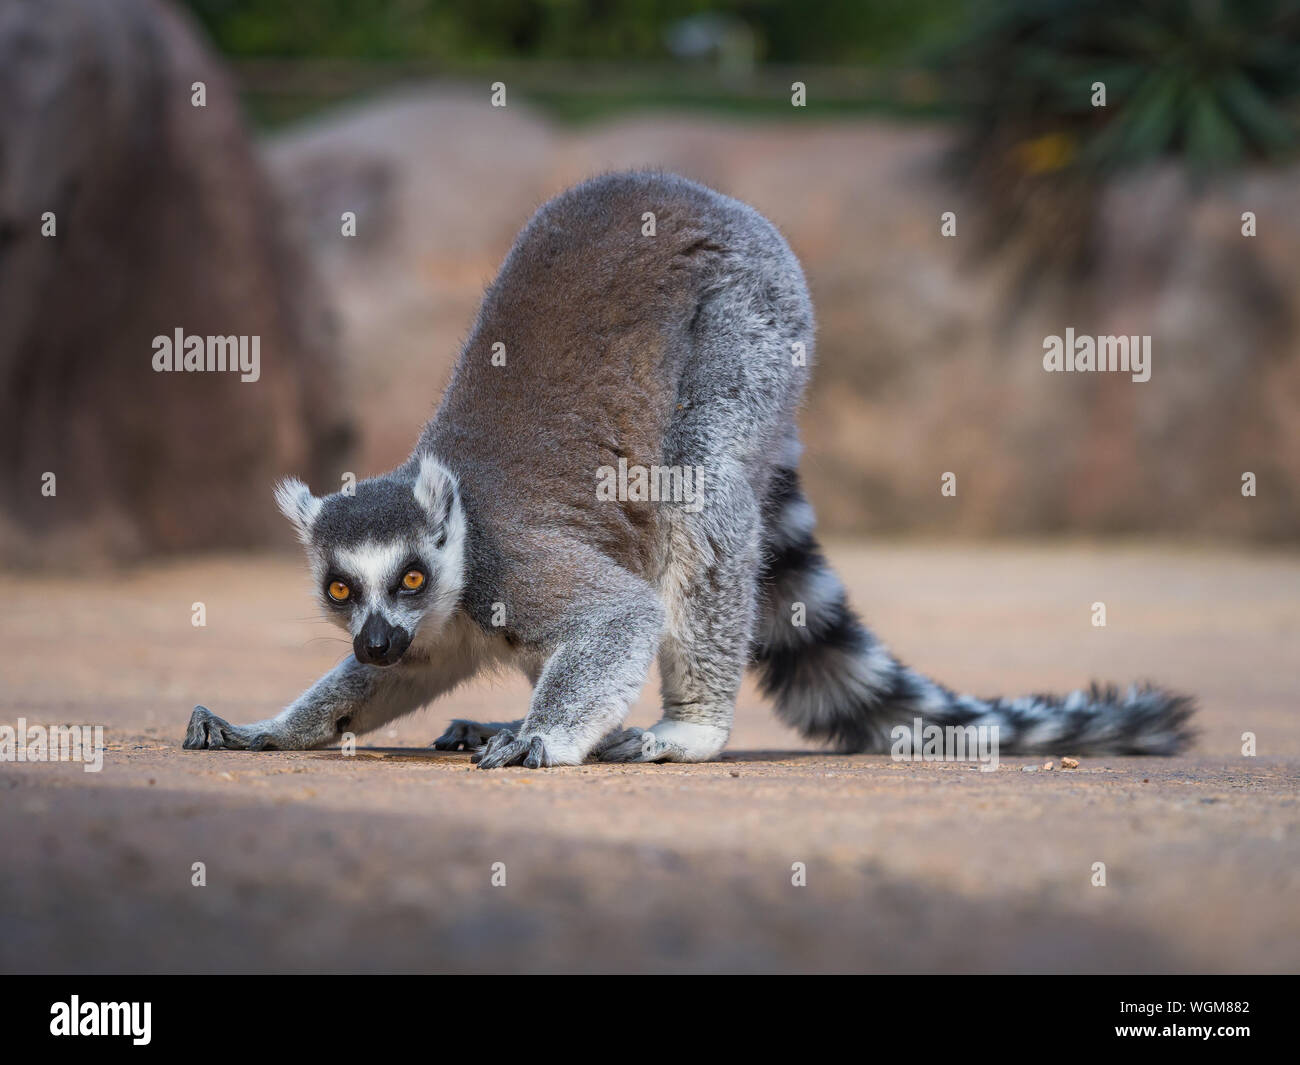 Ring tailed lemur (Lemur catta Linnaeus) from Madagascar looking into camera while searching food on the floor Stock Photo